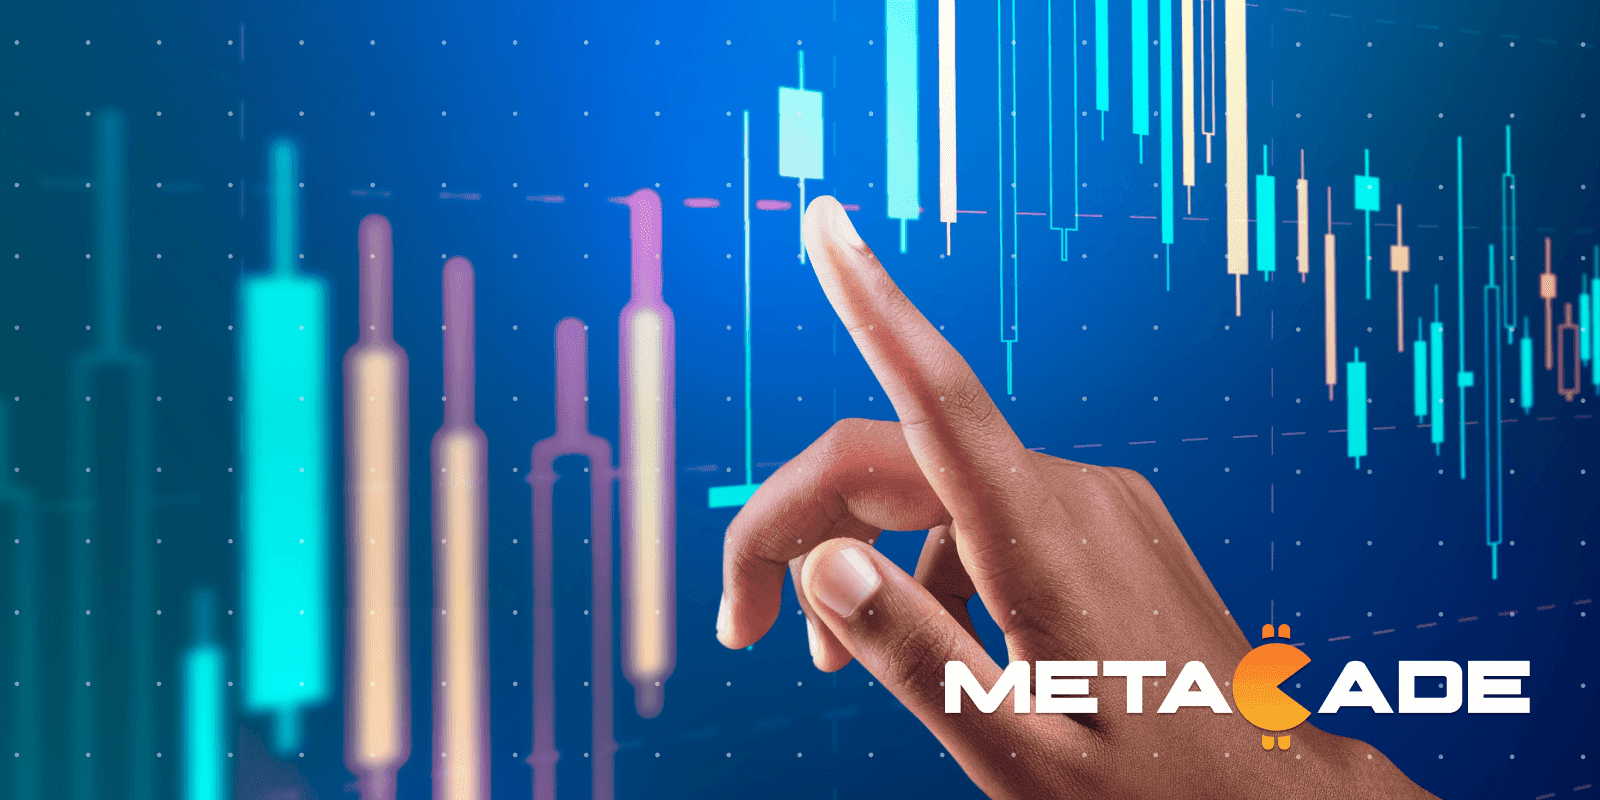 Top Metaverse Crypto Projects Metacade (MCADE) and Decentraland (MANA) Price Predictions for February